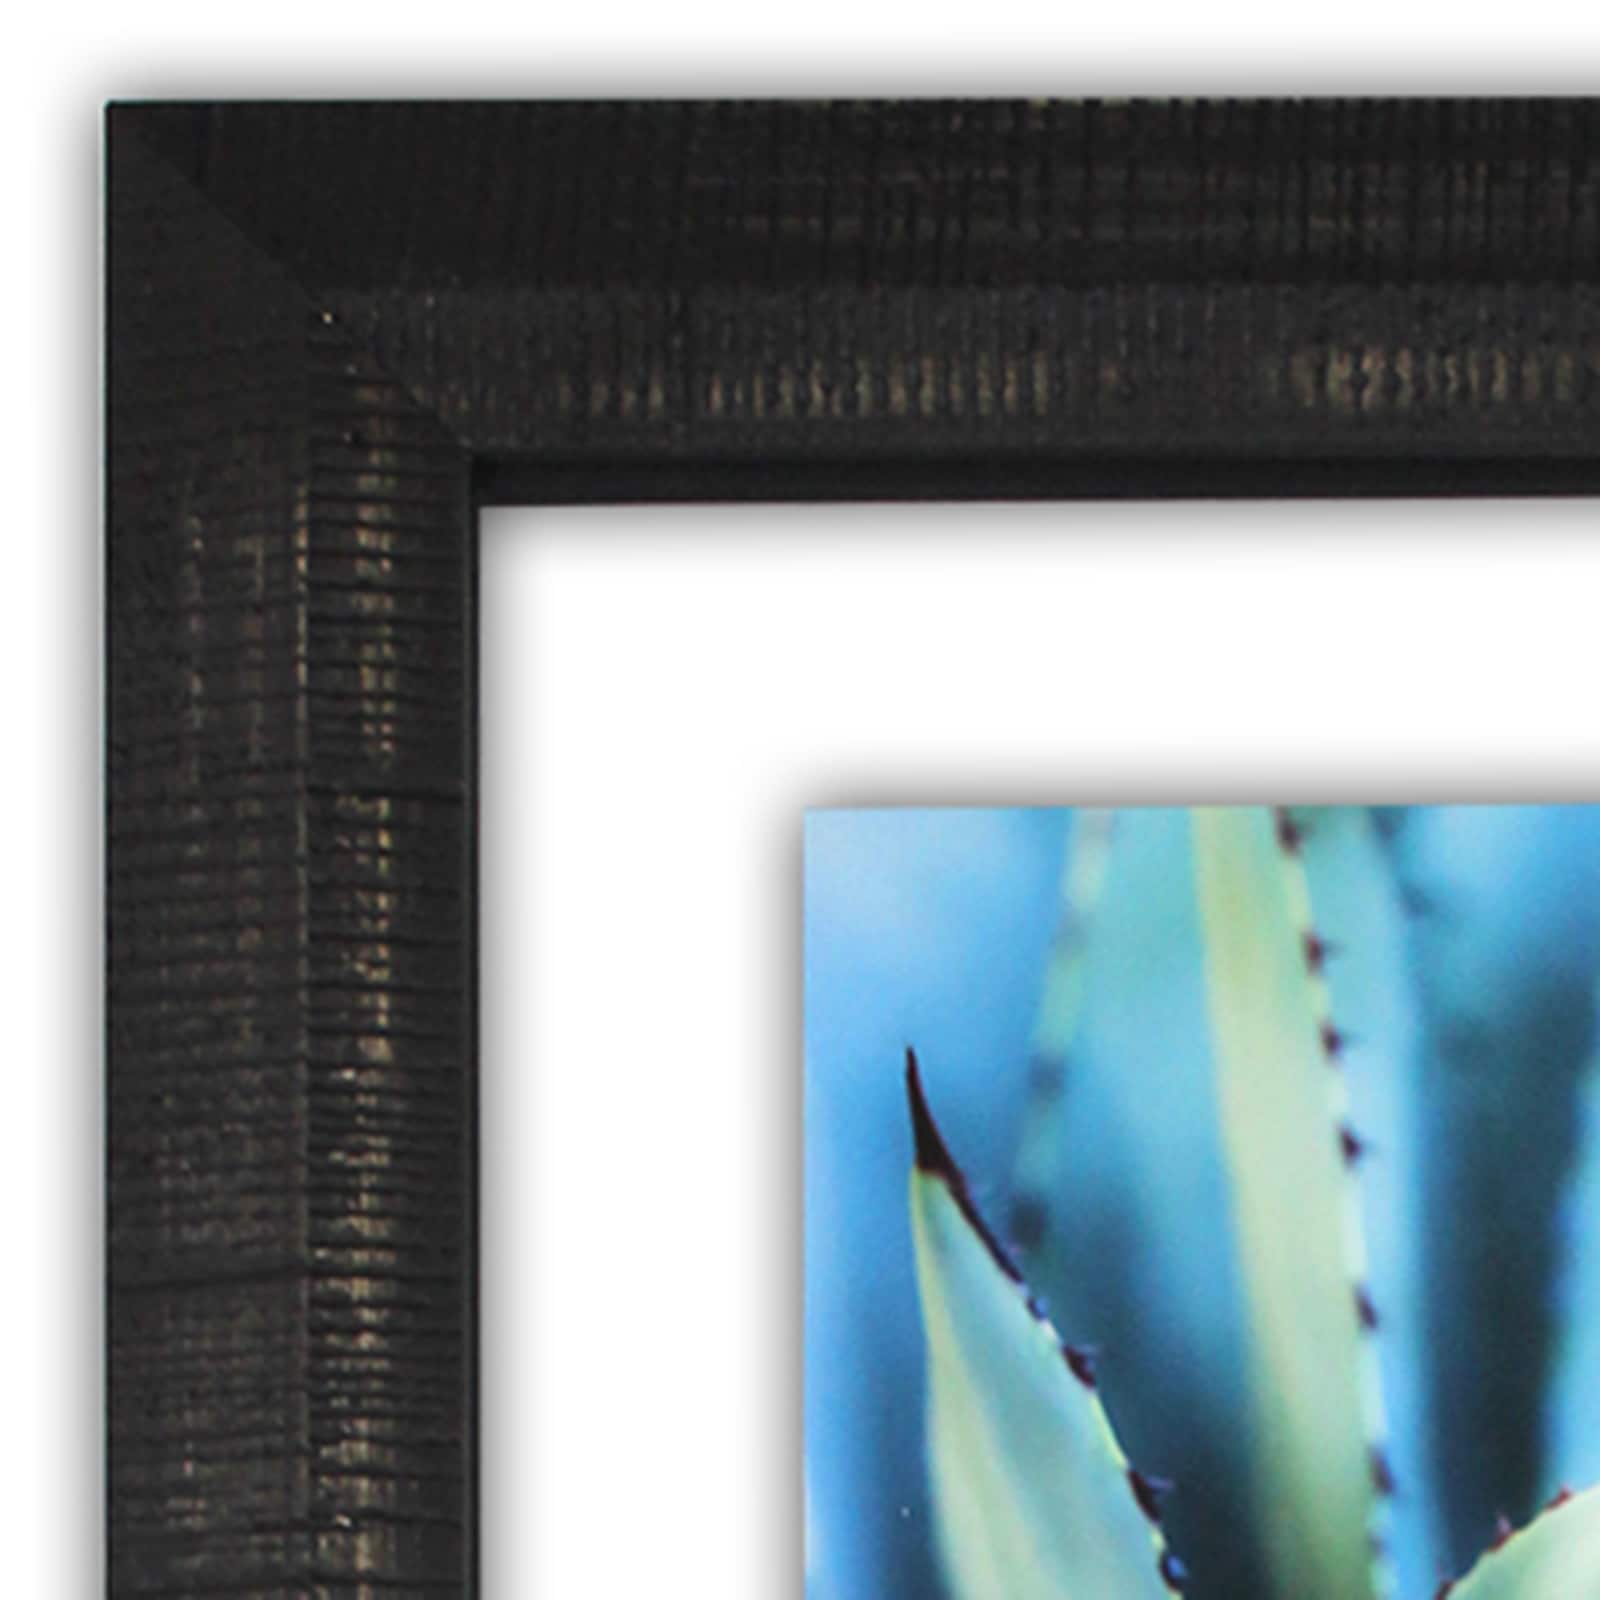 10 X 20 PICTURE FRAME –